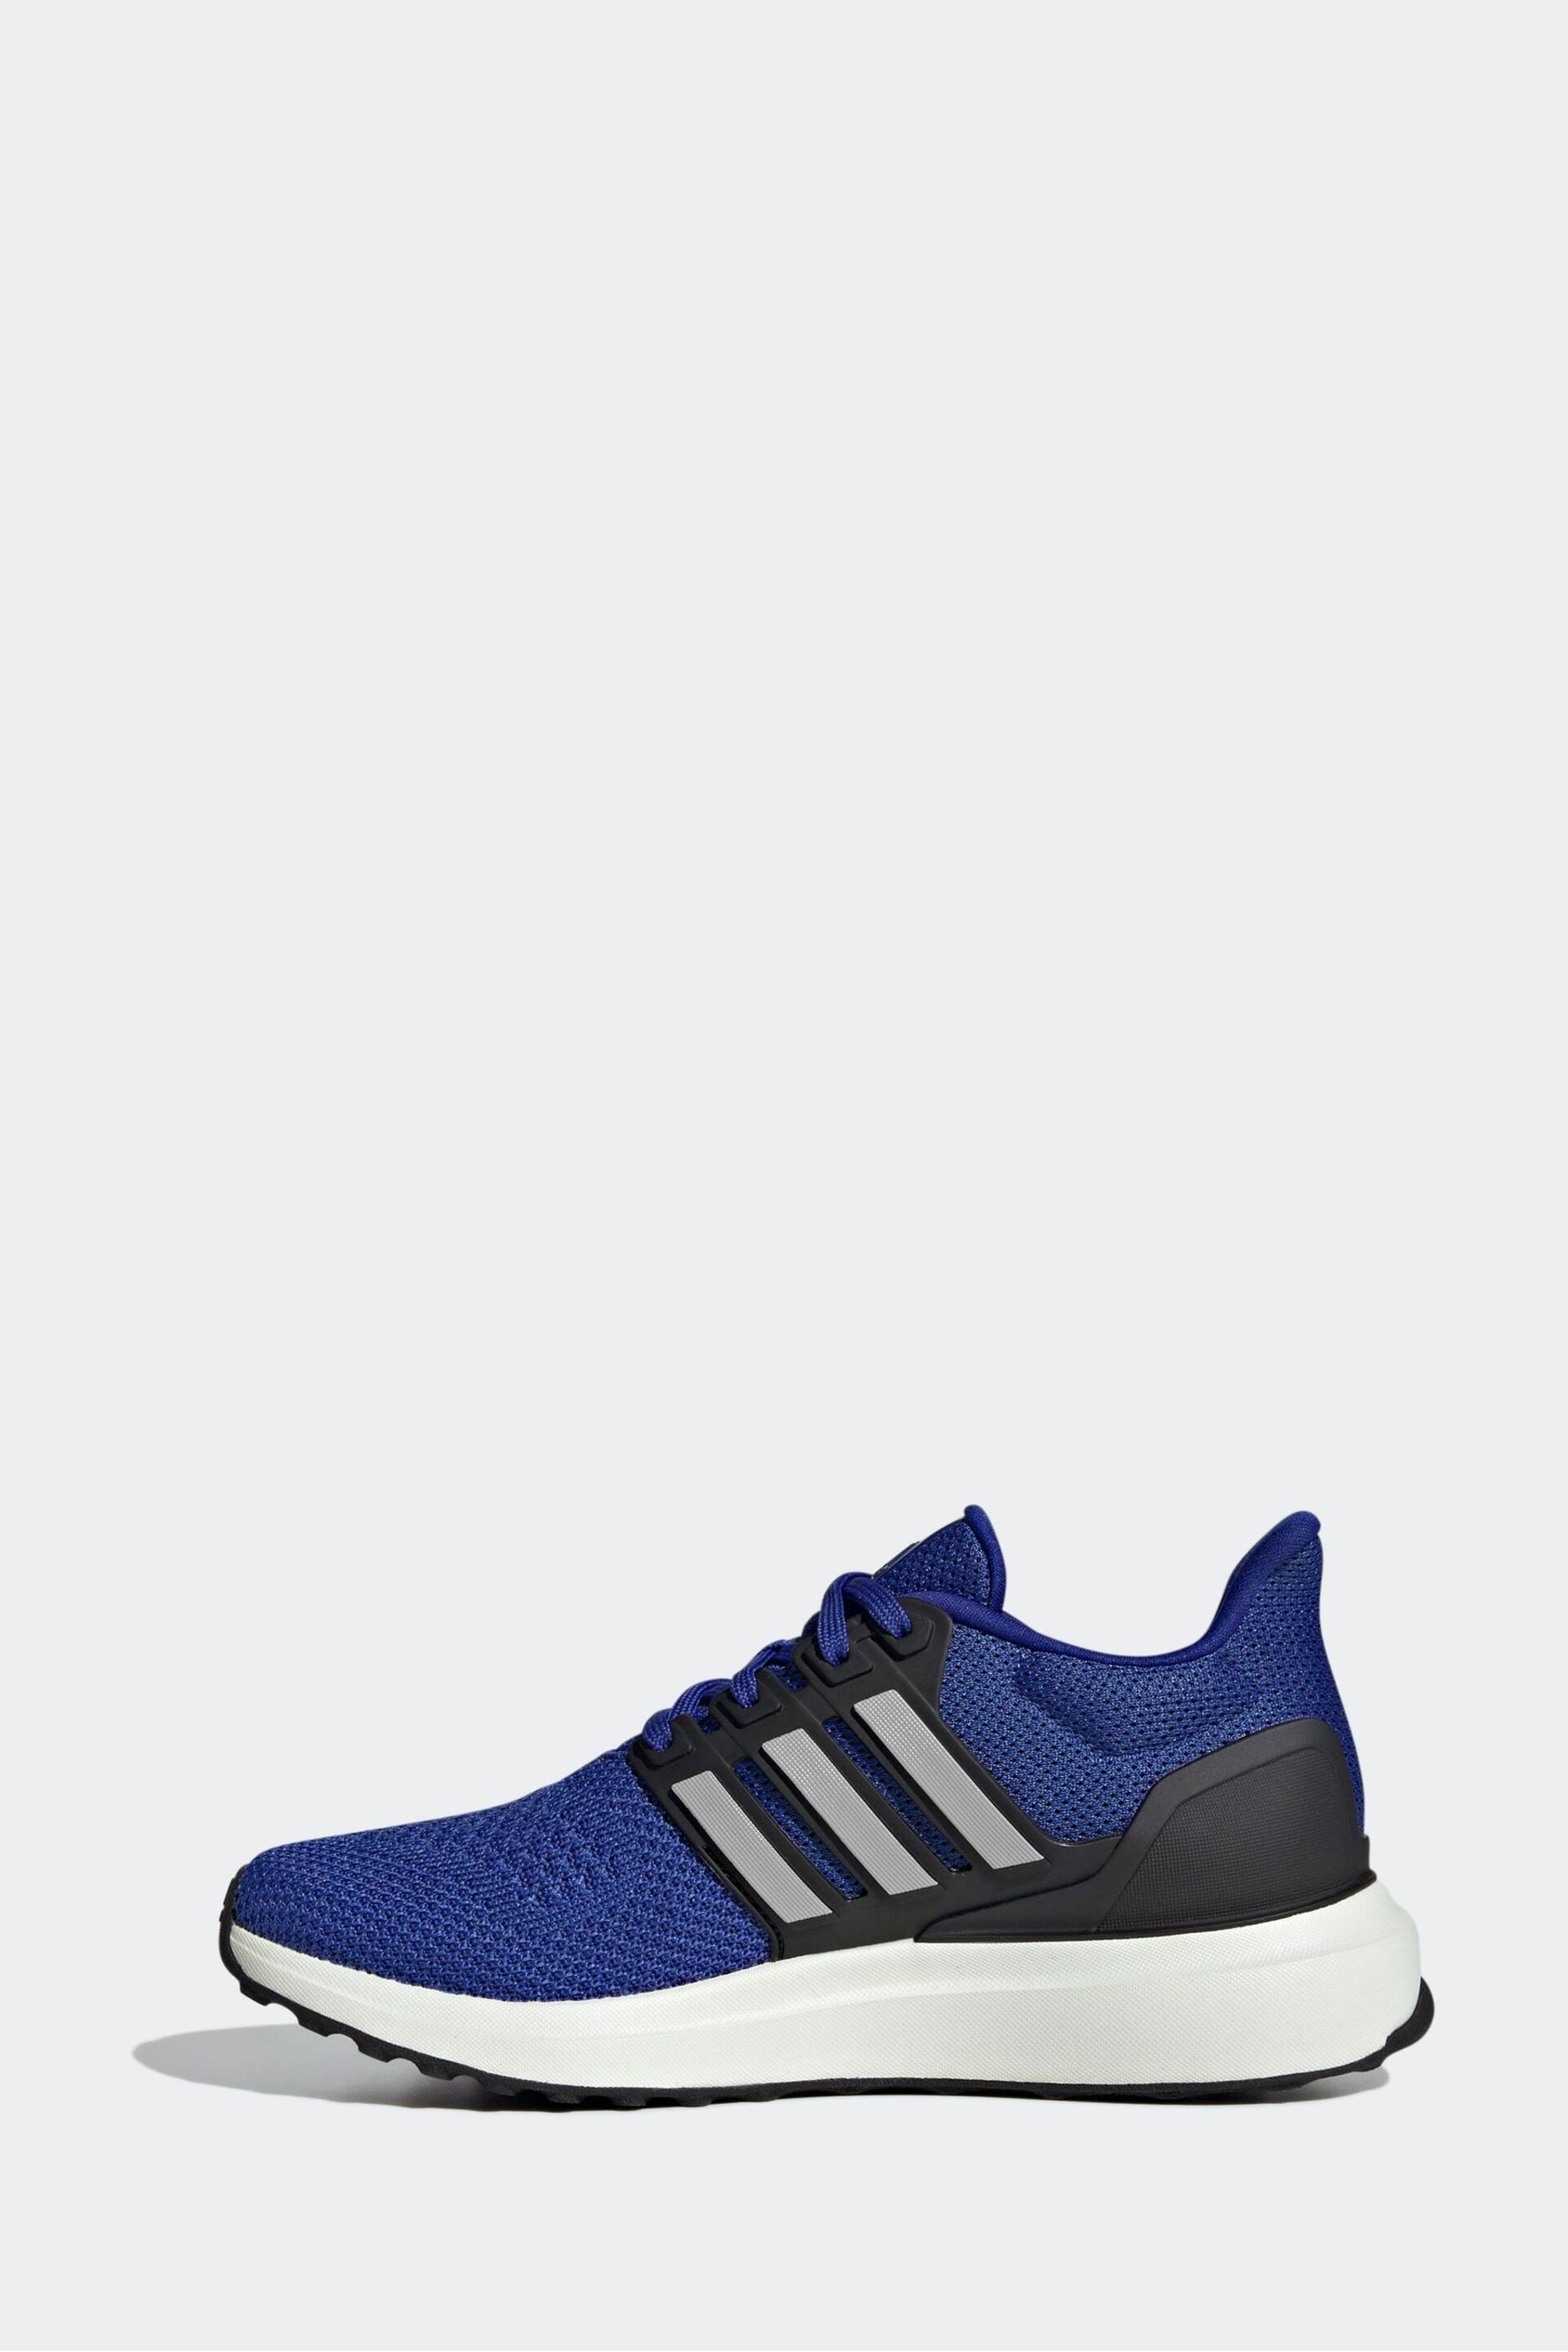 adidas Blue Sportswear Ubounce Dna Trainers - Image 2 of 9